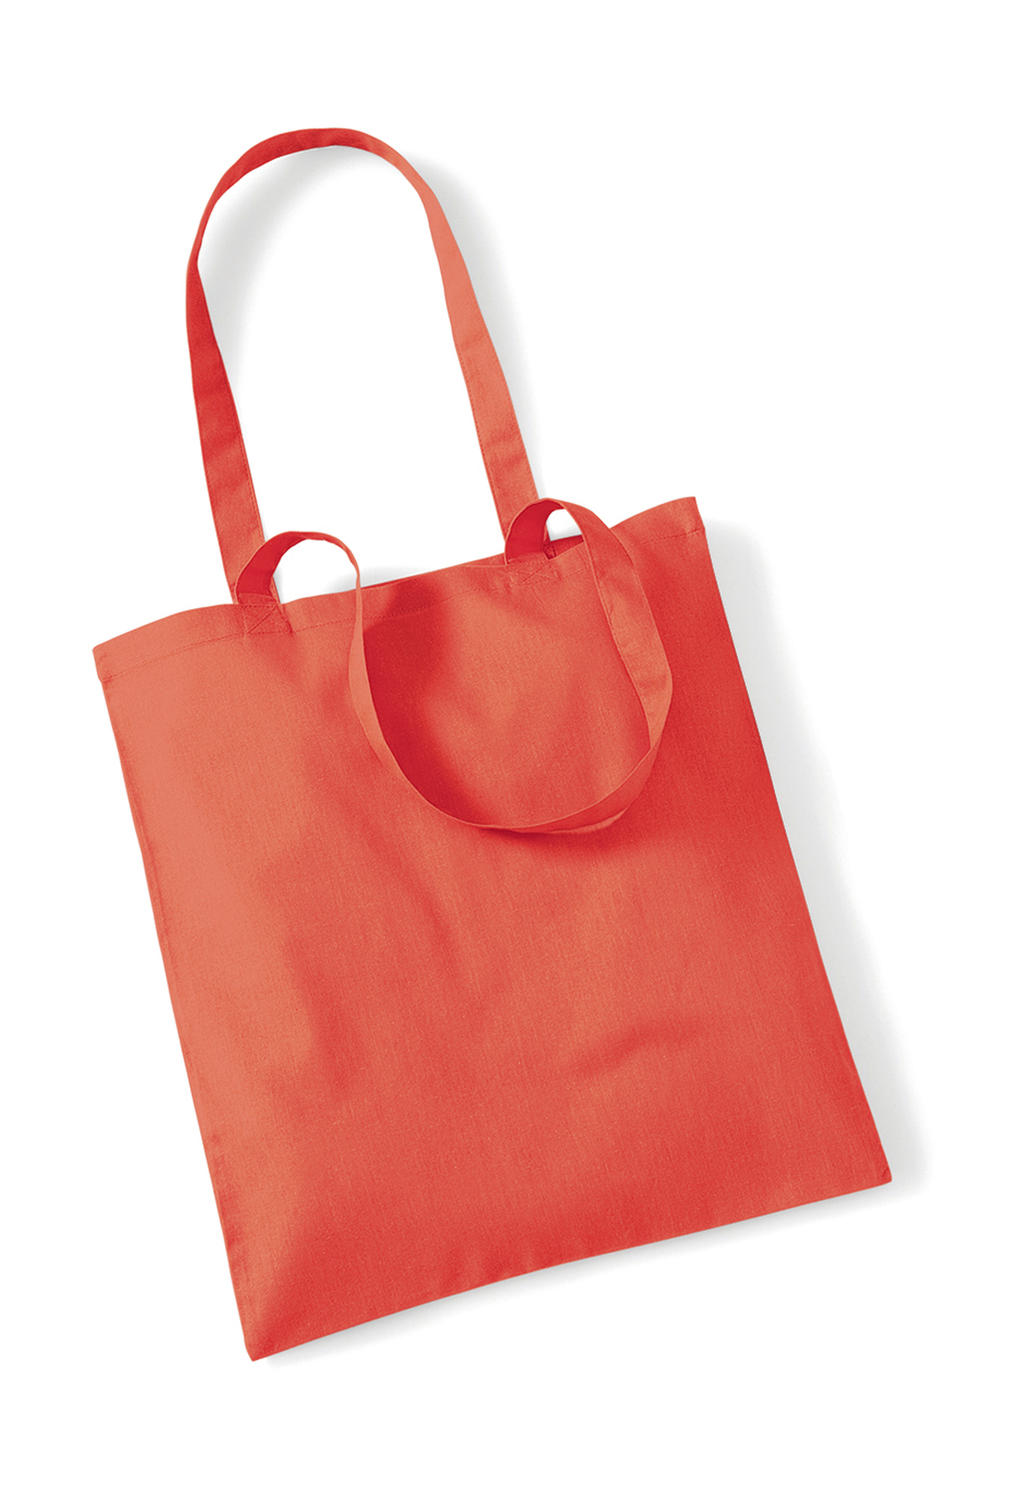  Bag for Life - Long Handles in Farbe Coral